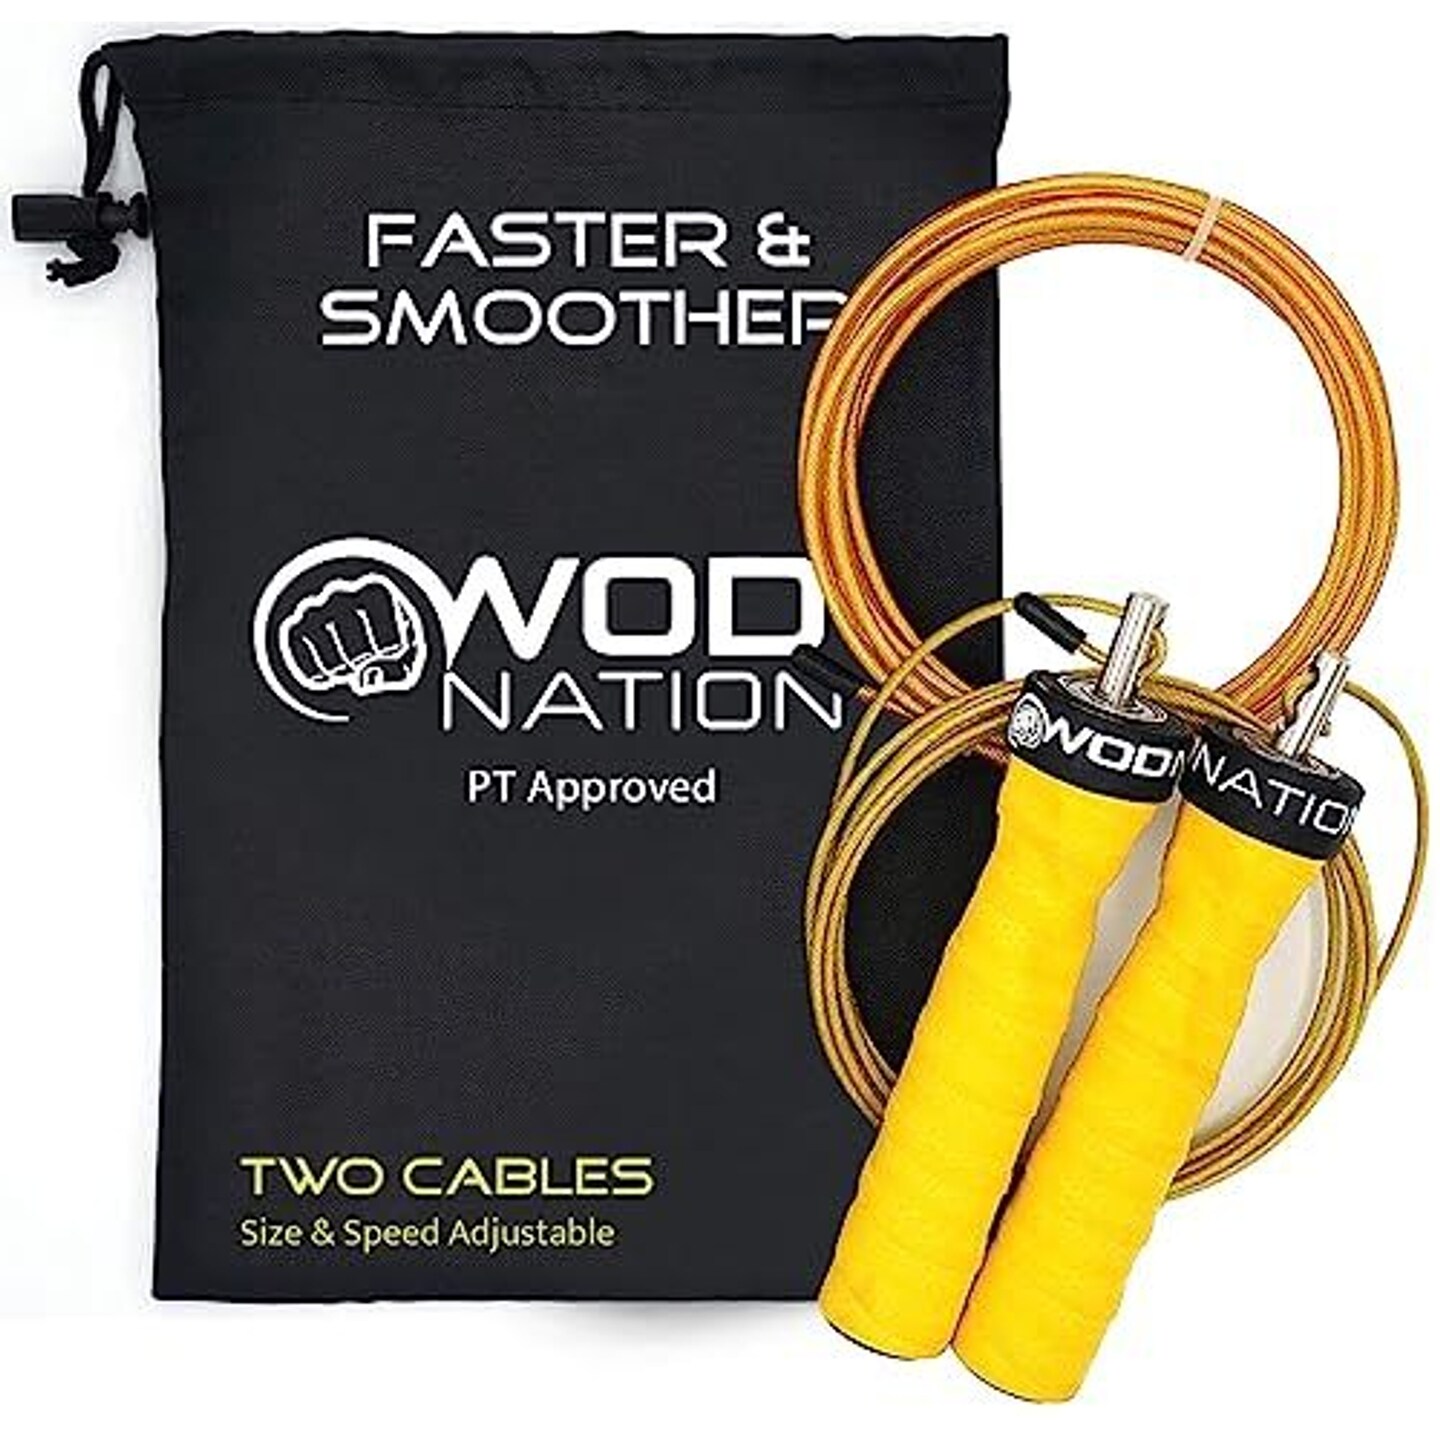 WOD Nation Attack Speed Adjustable Jump Rope : Unique Two Cable Skipping Workout System : One Thick and One Light 11 Foot Jumping Cable : Perfect for Double Unders forHiit : Fits Men and Women, Yellow